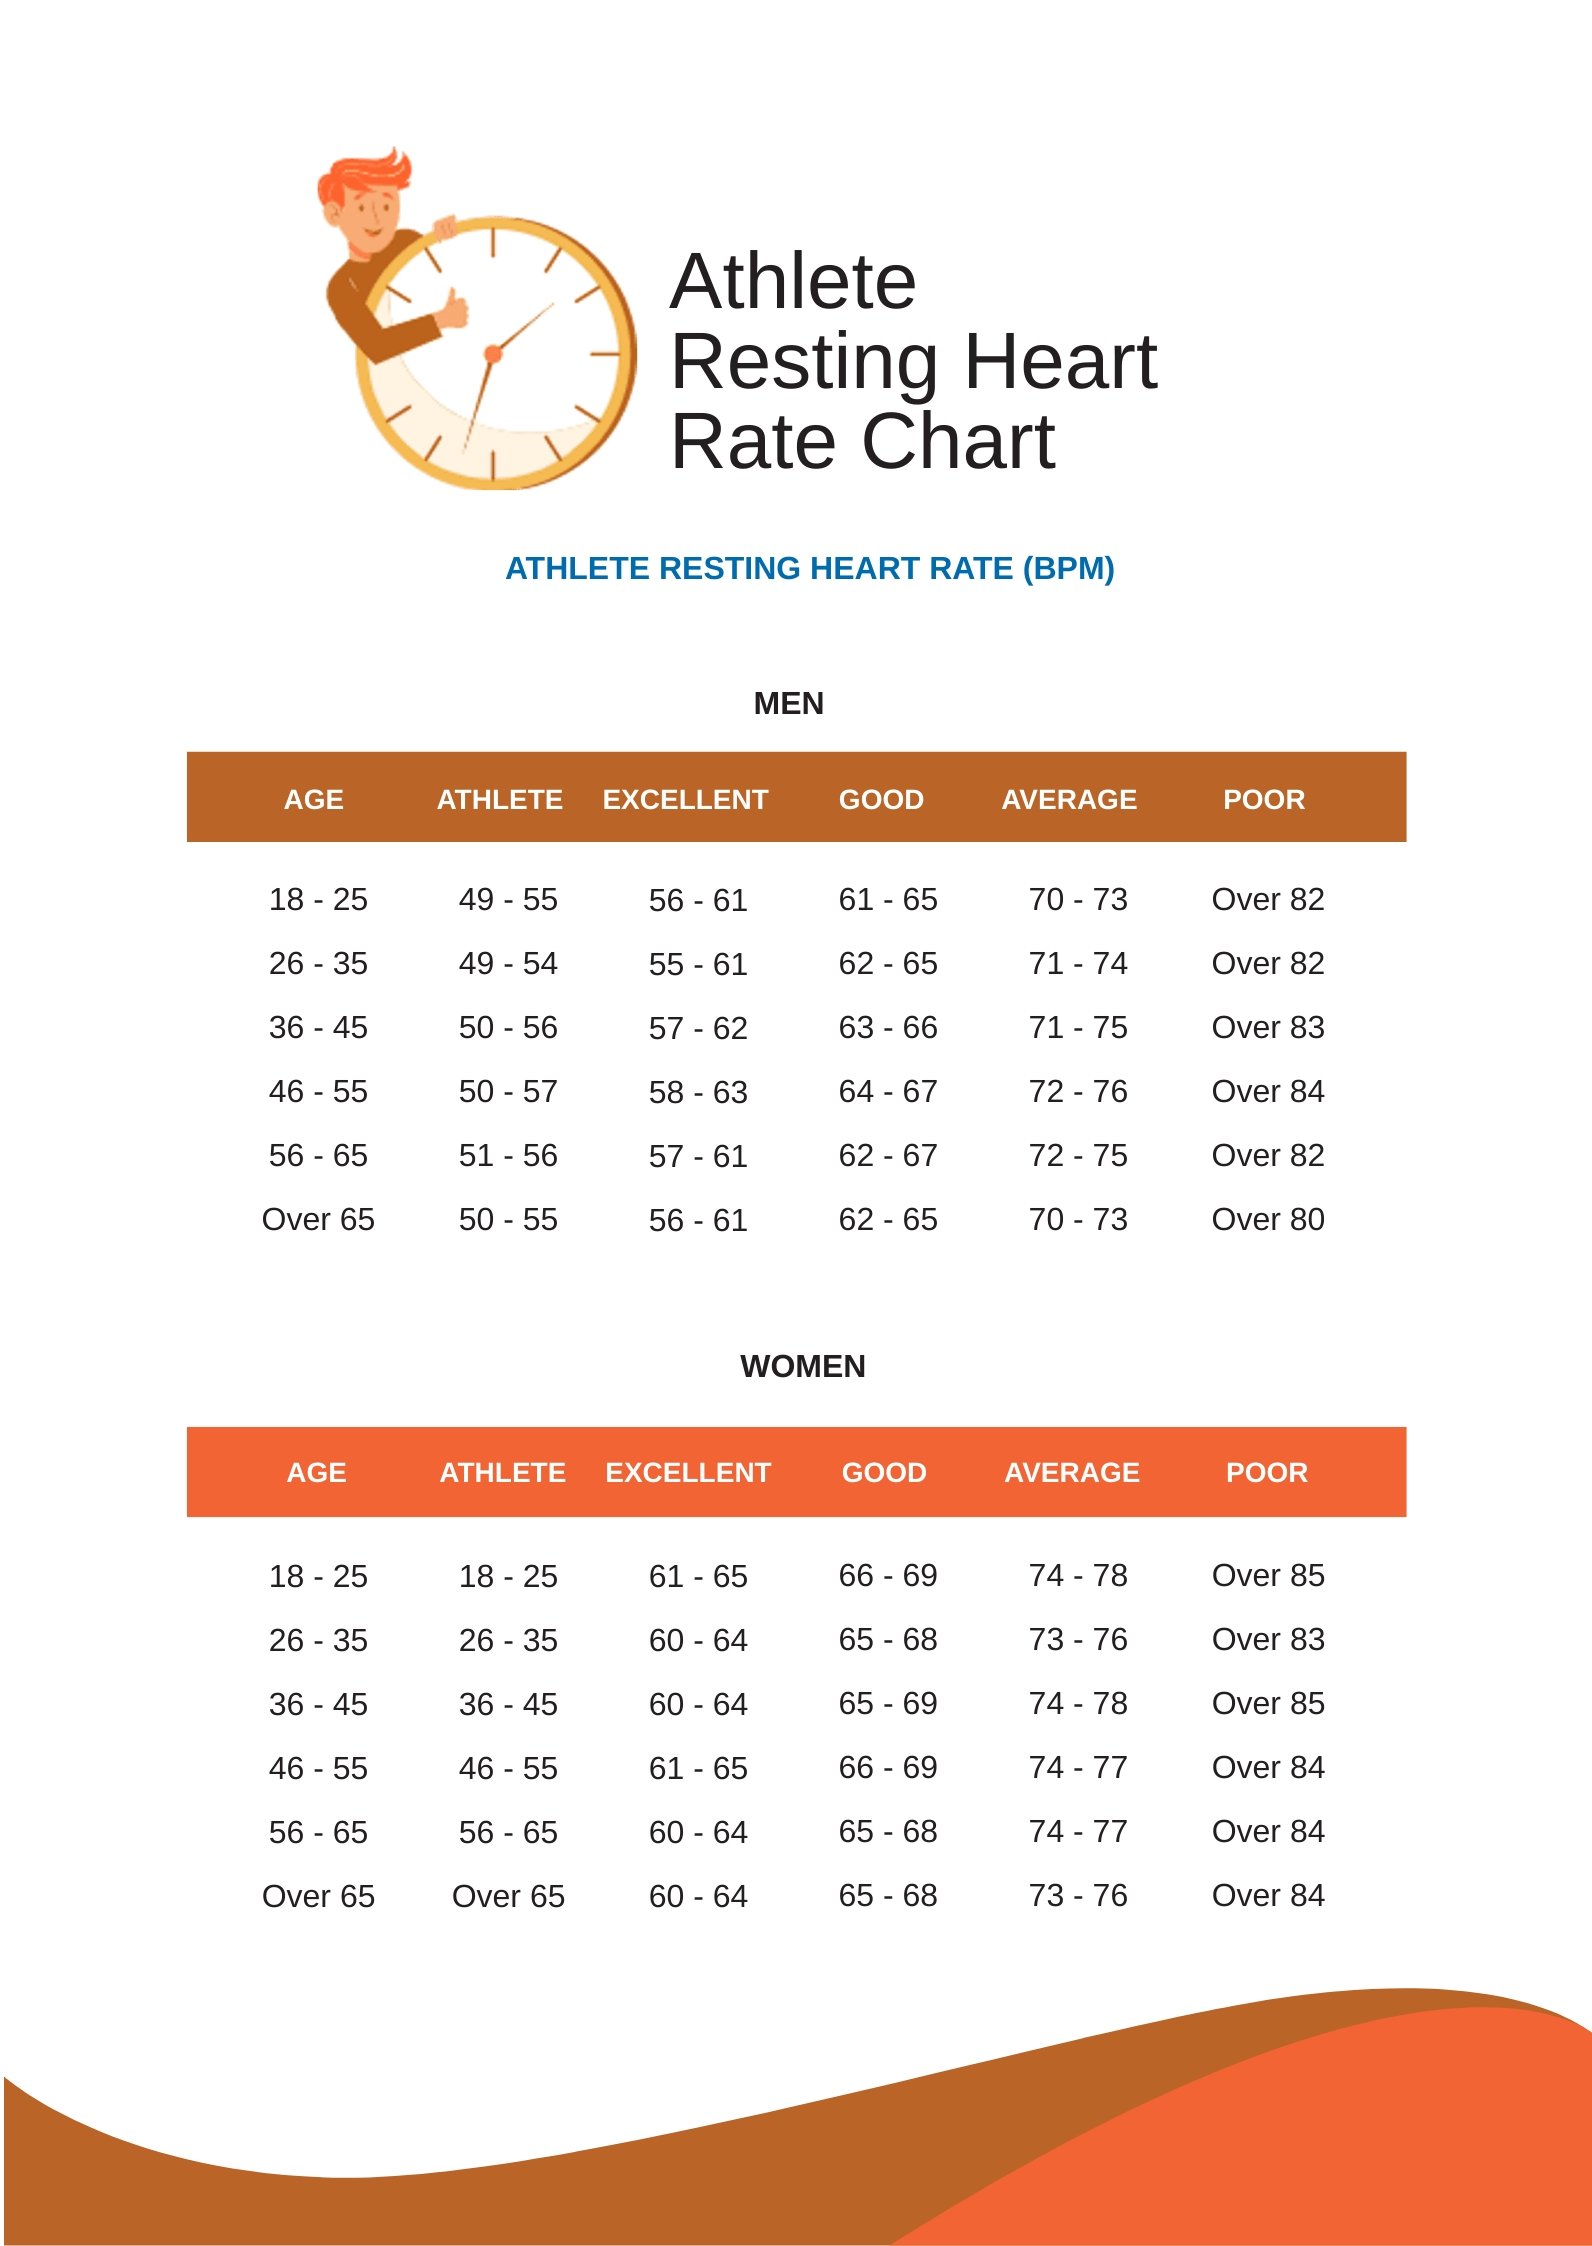 Athlete Resting Heart Rate Chart